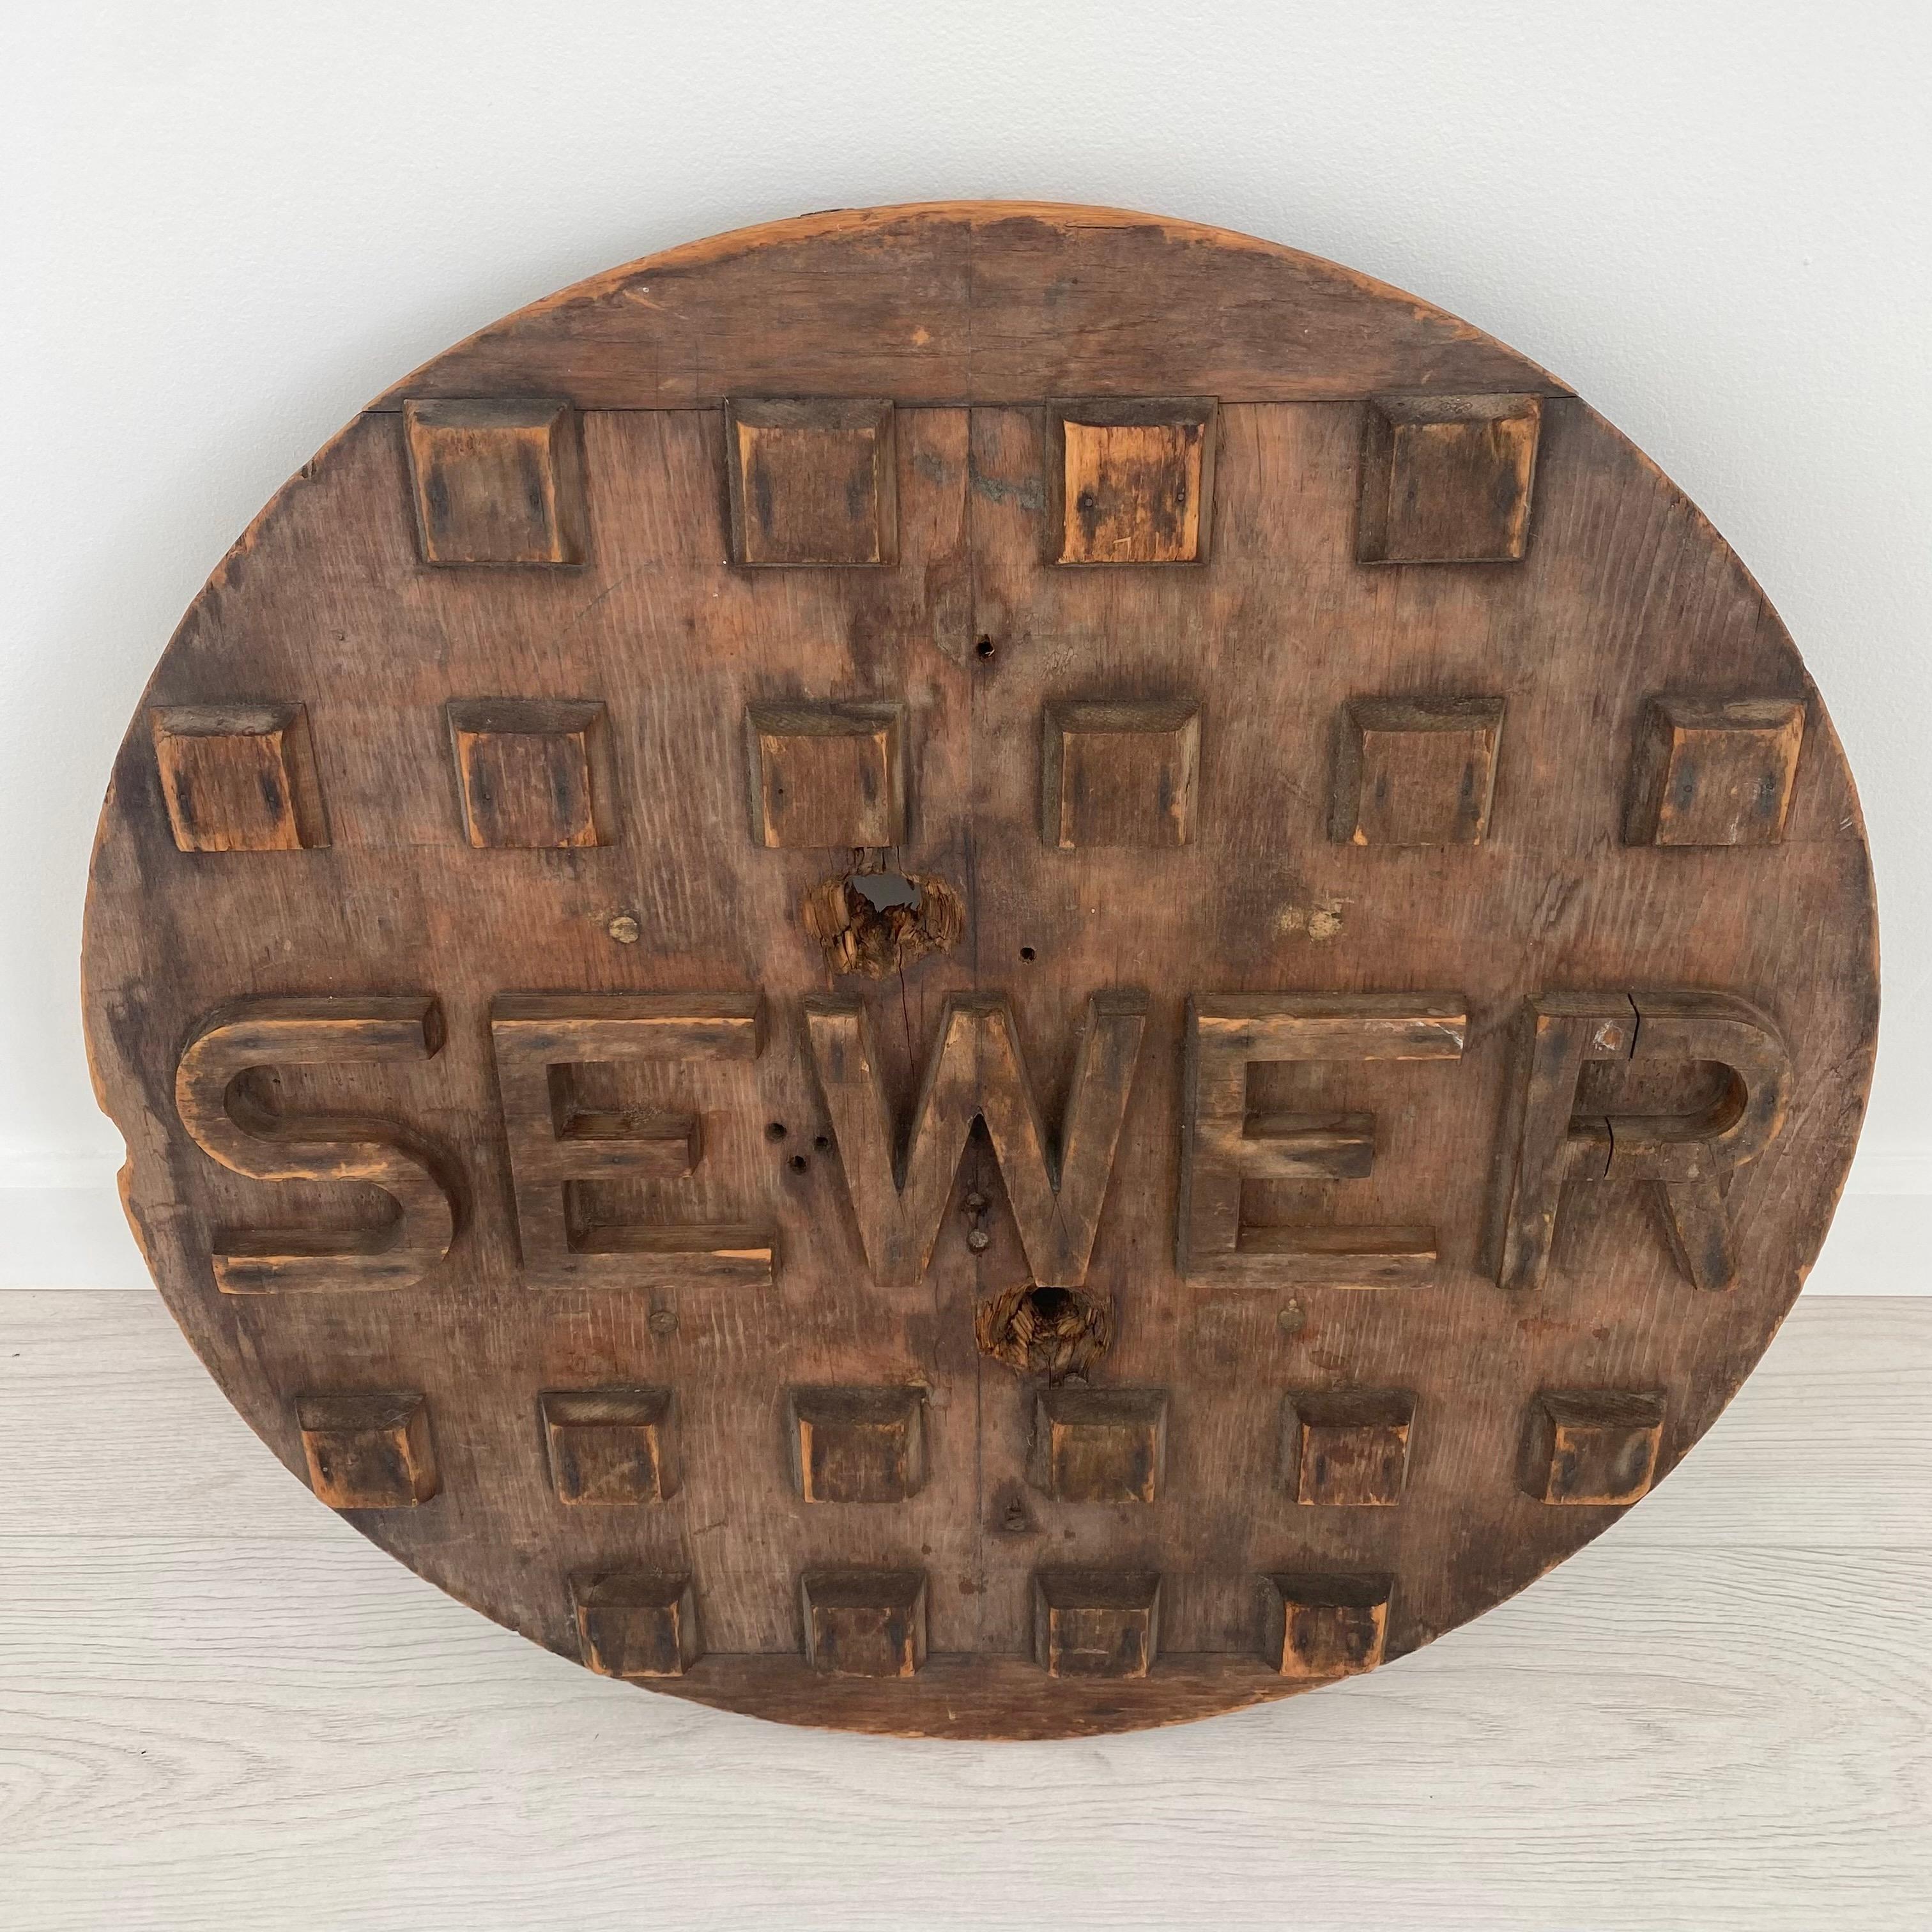 Extremely unique wooden sewer cap prototype. Made by by various wooden cubes and blocks as well as letters nailed to the front of the main ply of the cap giving it its design. The base has some crossbars also made of wood which can be used for